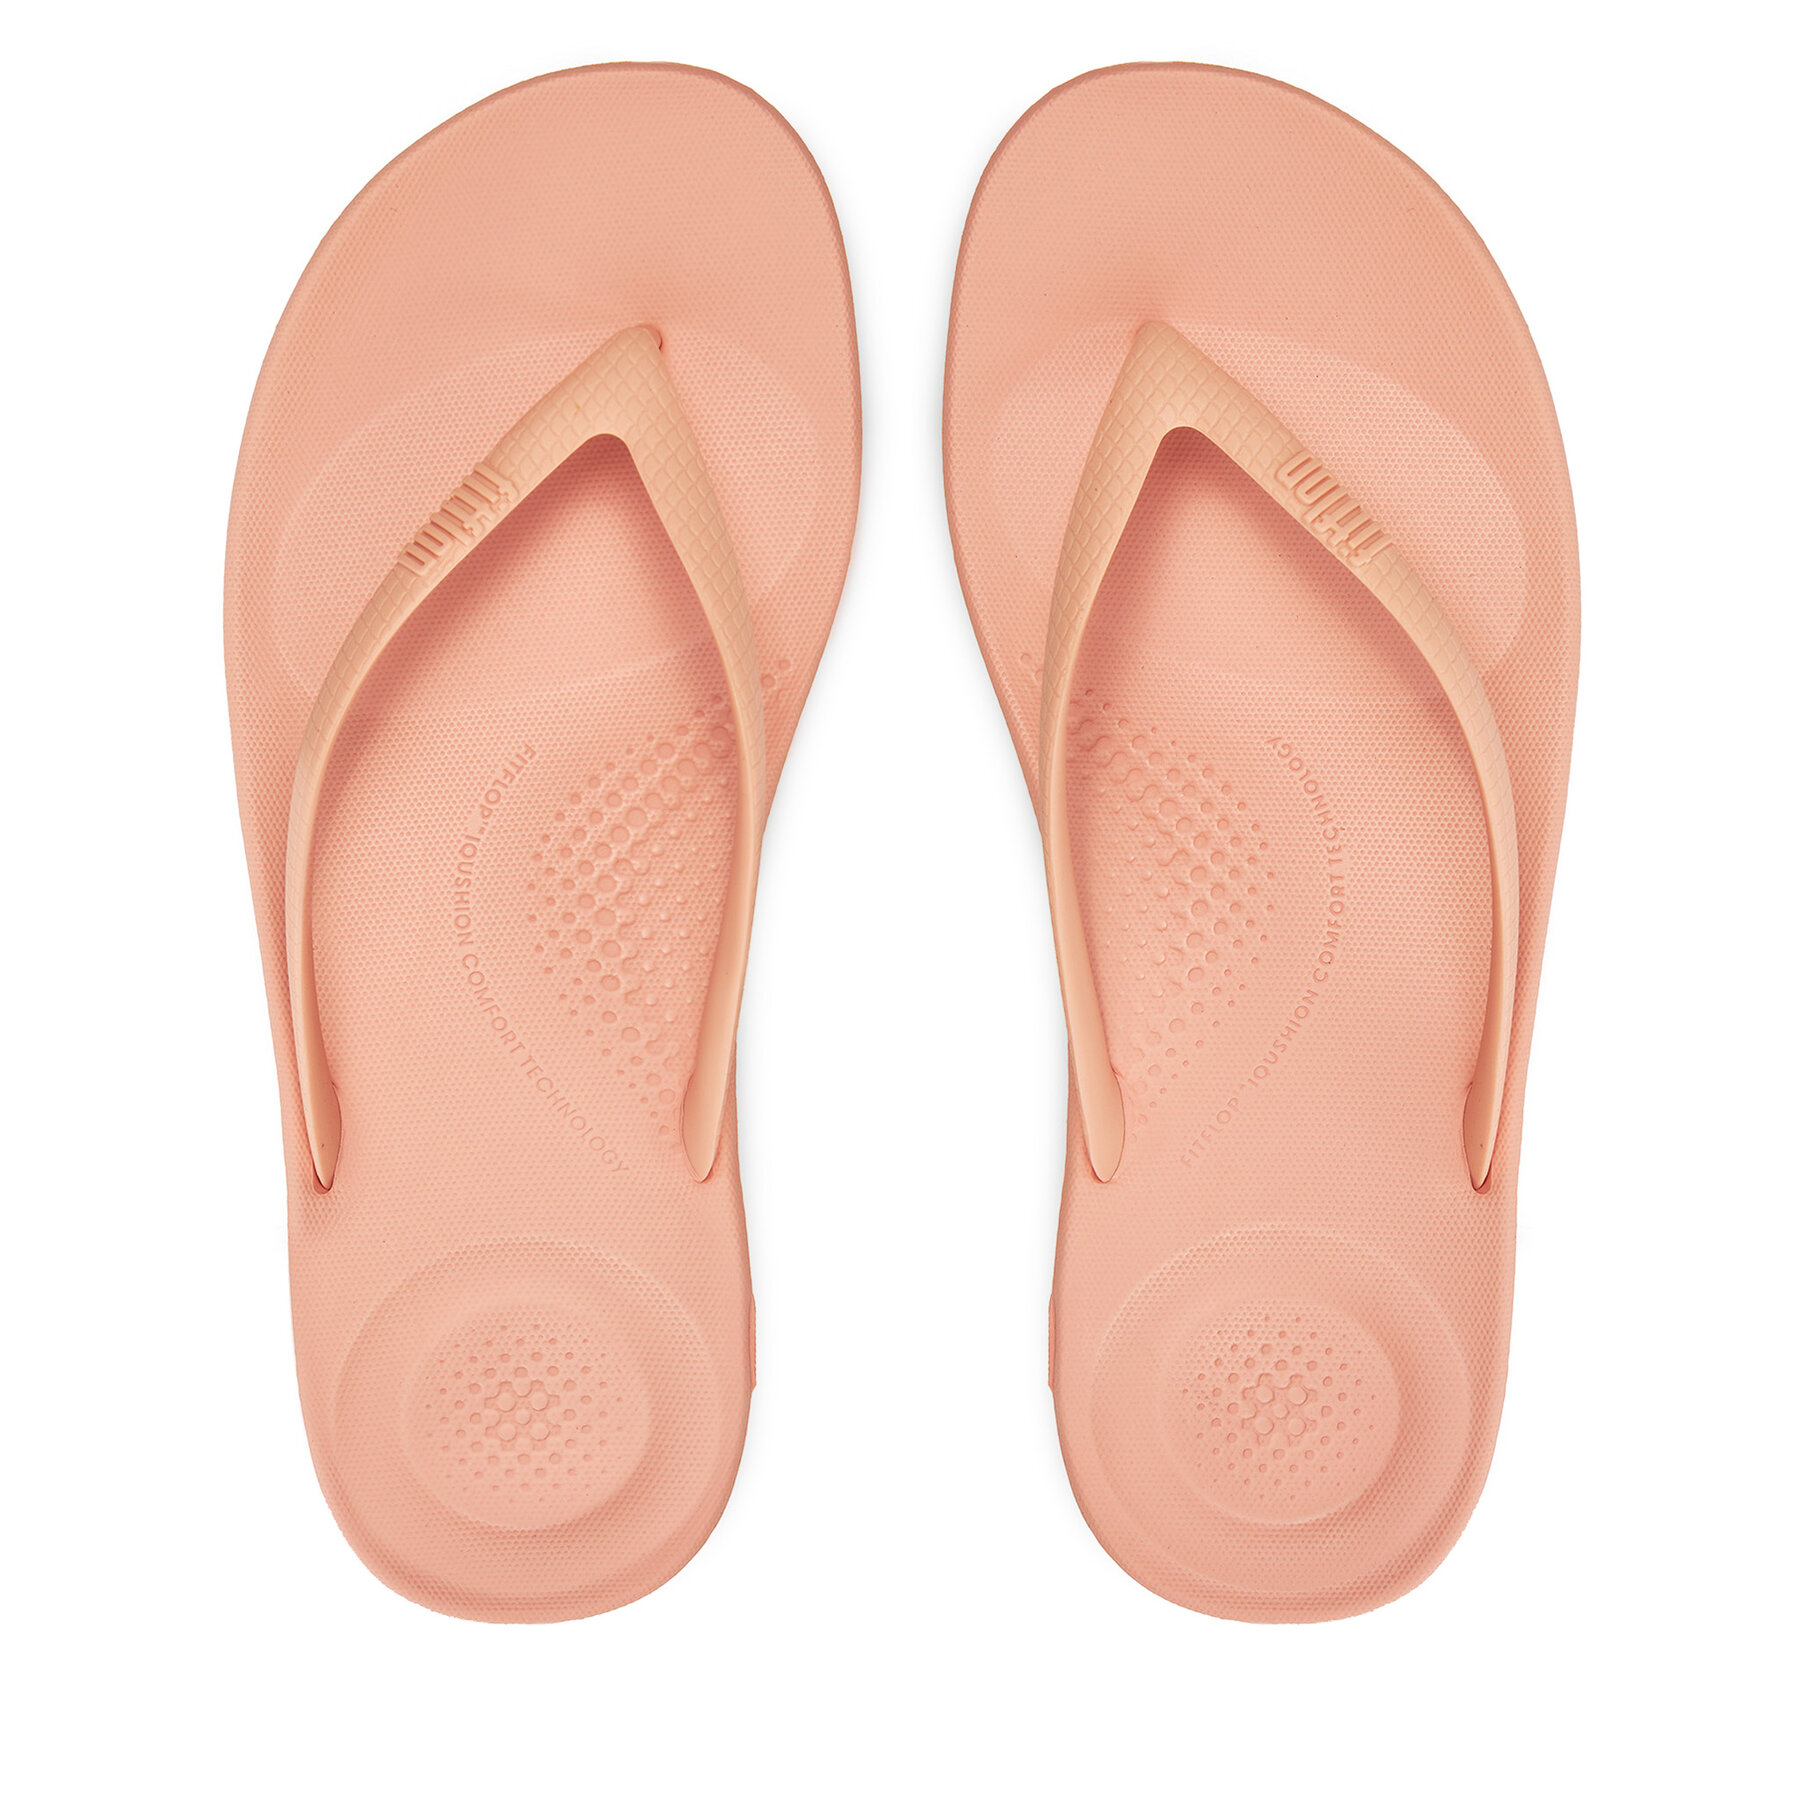 Zehentrenner FitFlop Iqushion E54 Rosa von FitFlop